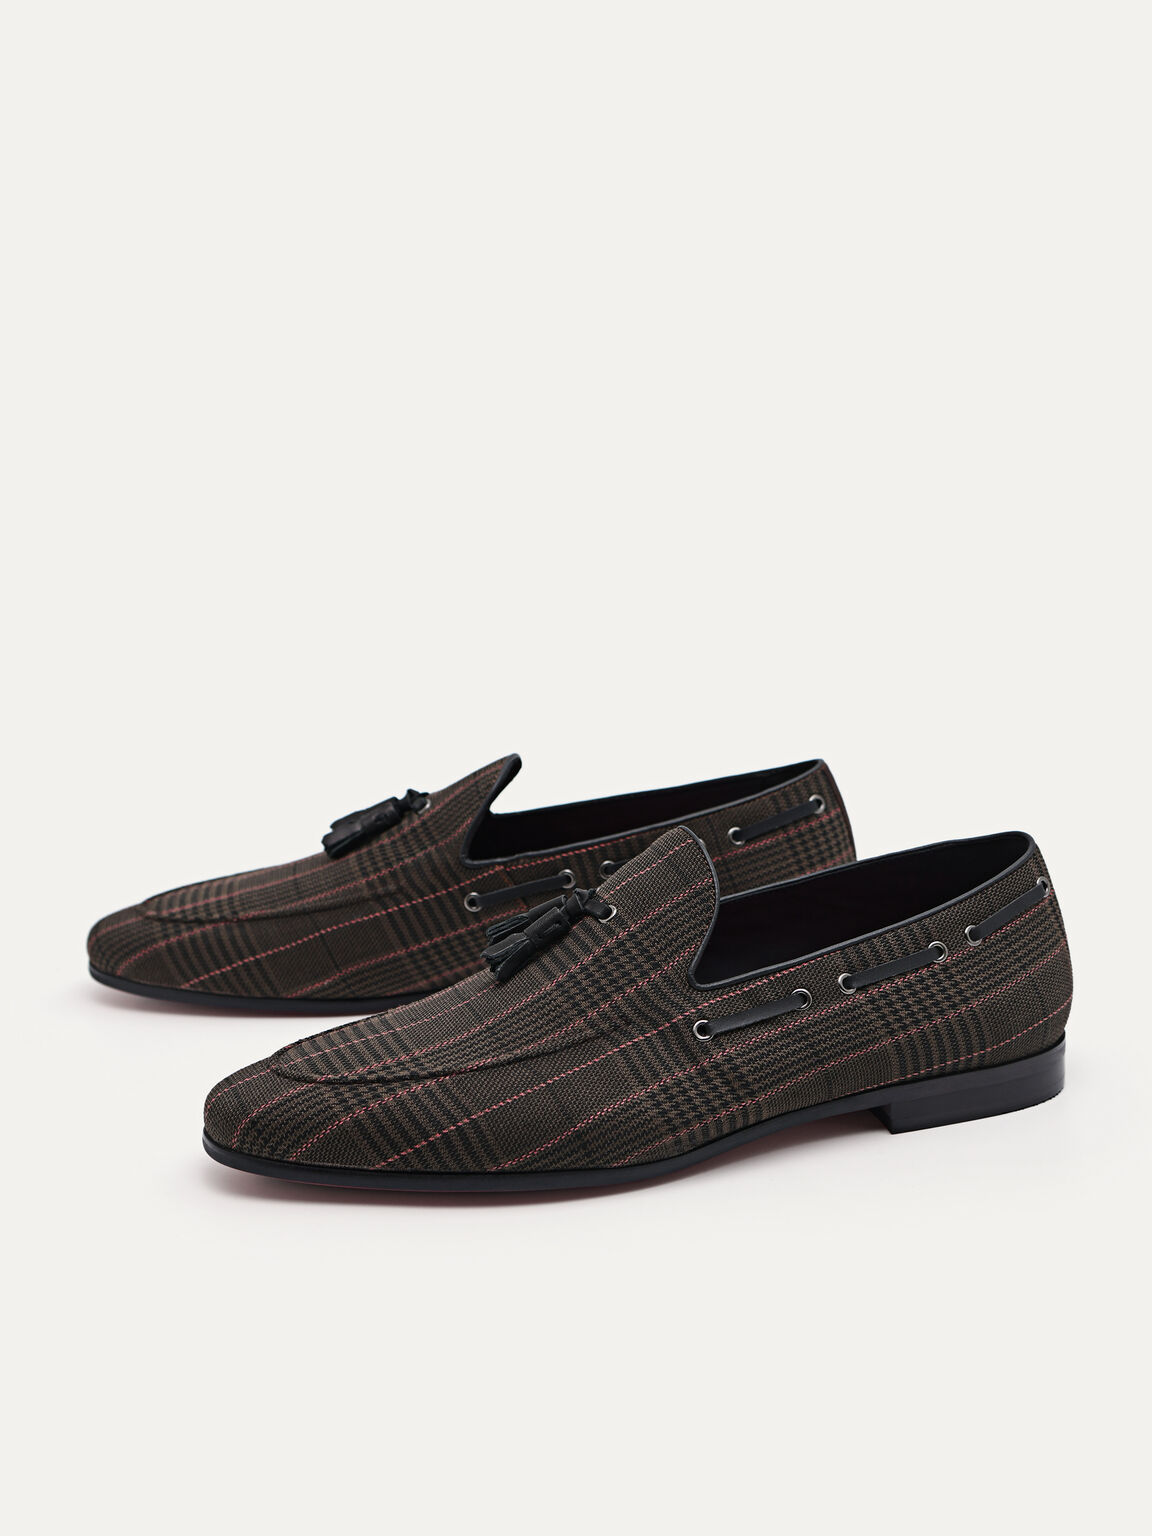 Checked Tasselled Loafers, Olive